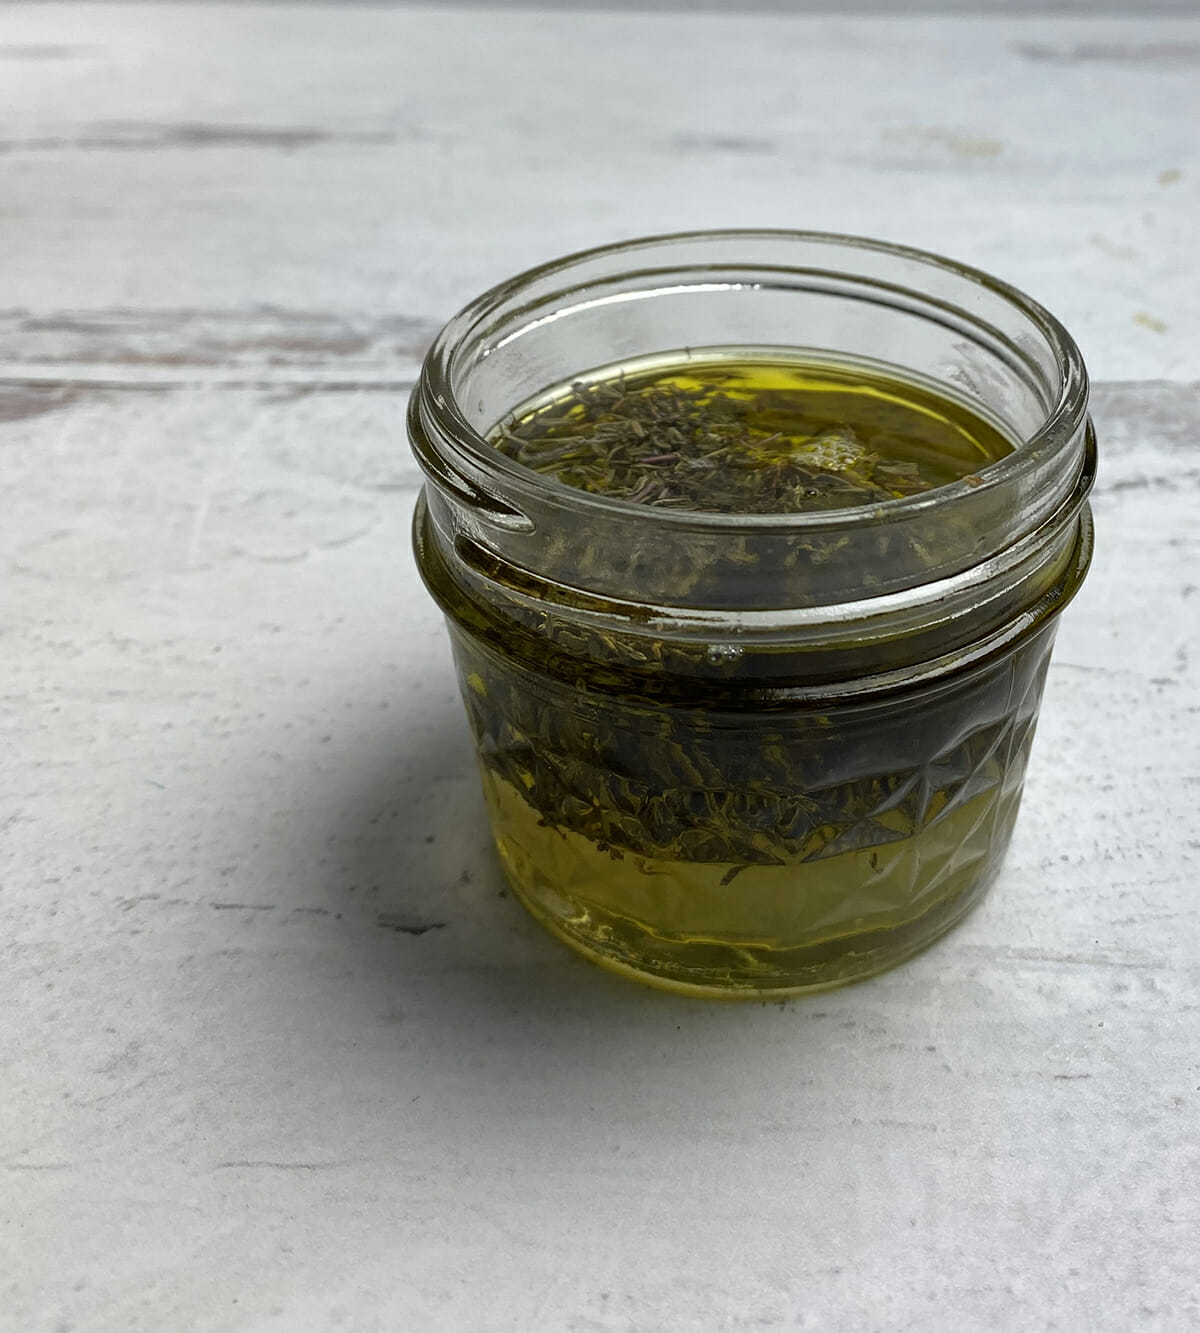 Lemon and olive oil dressing in a small jar ready to pour on the roasted salmon bowl.